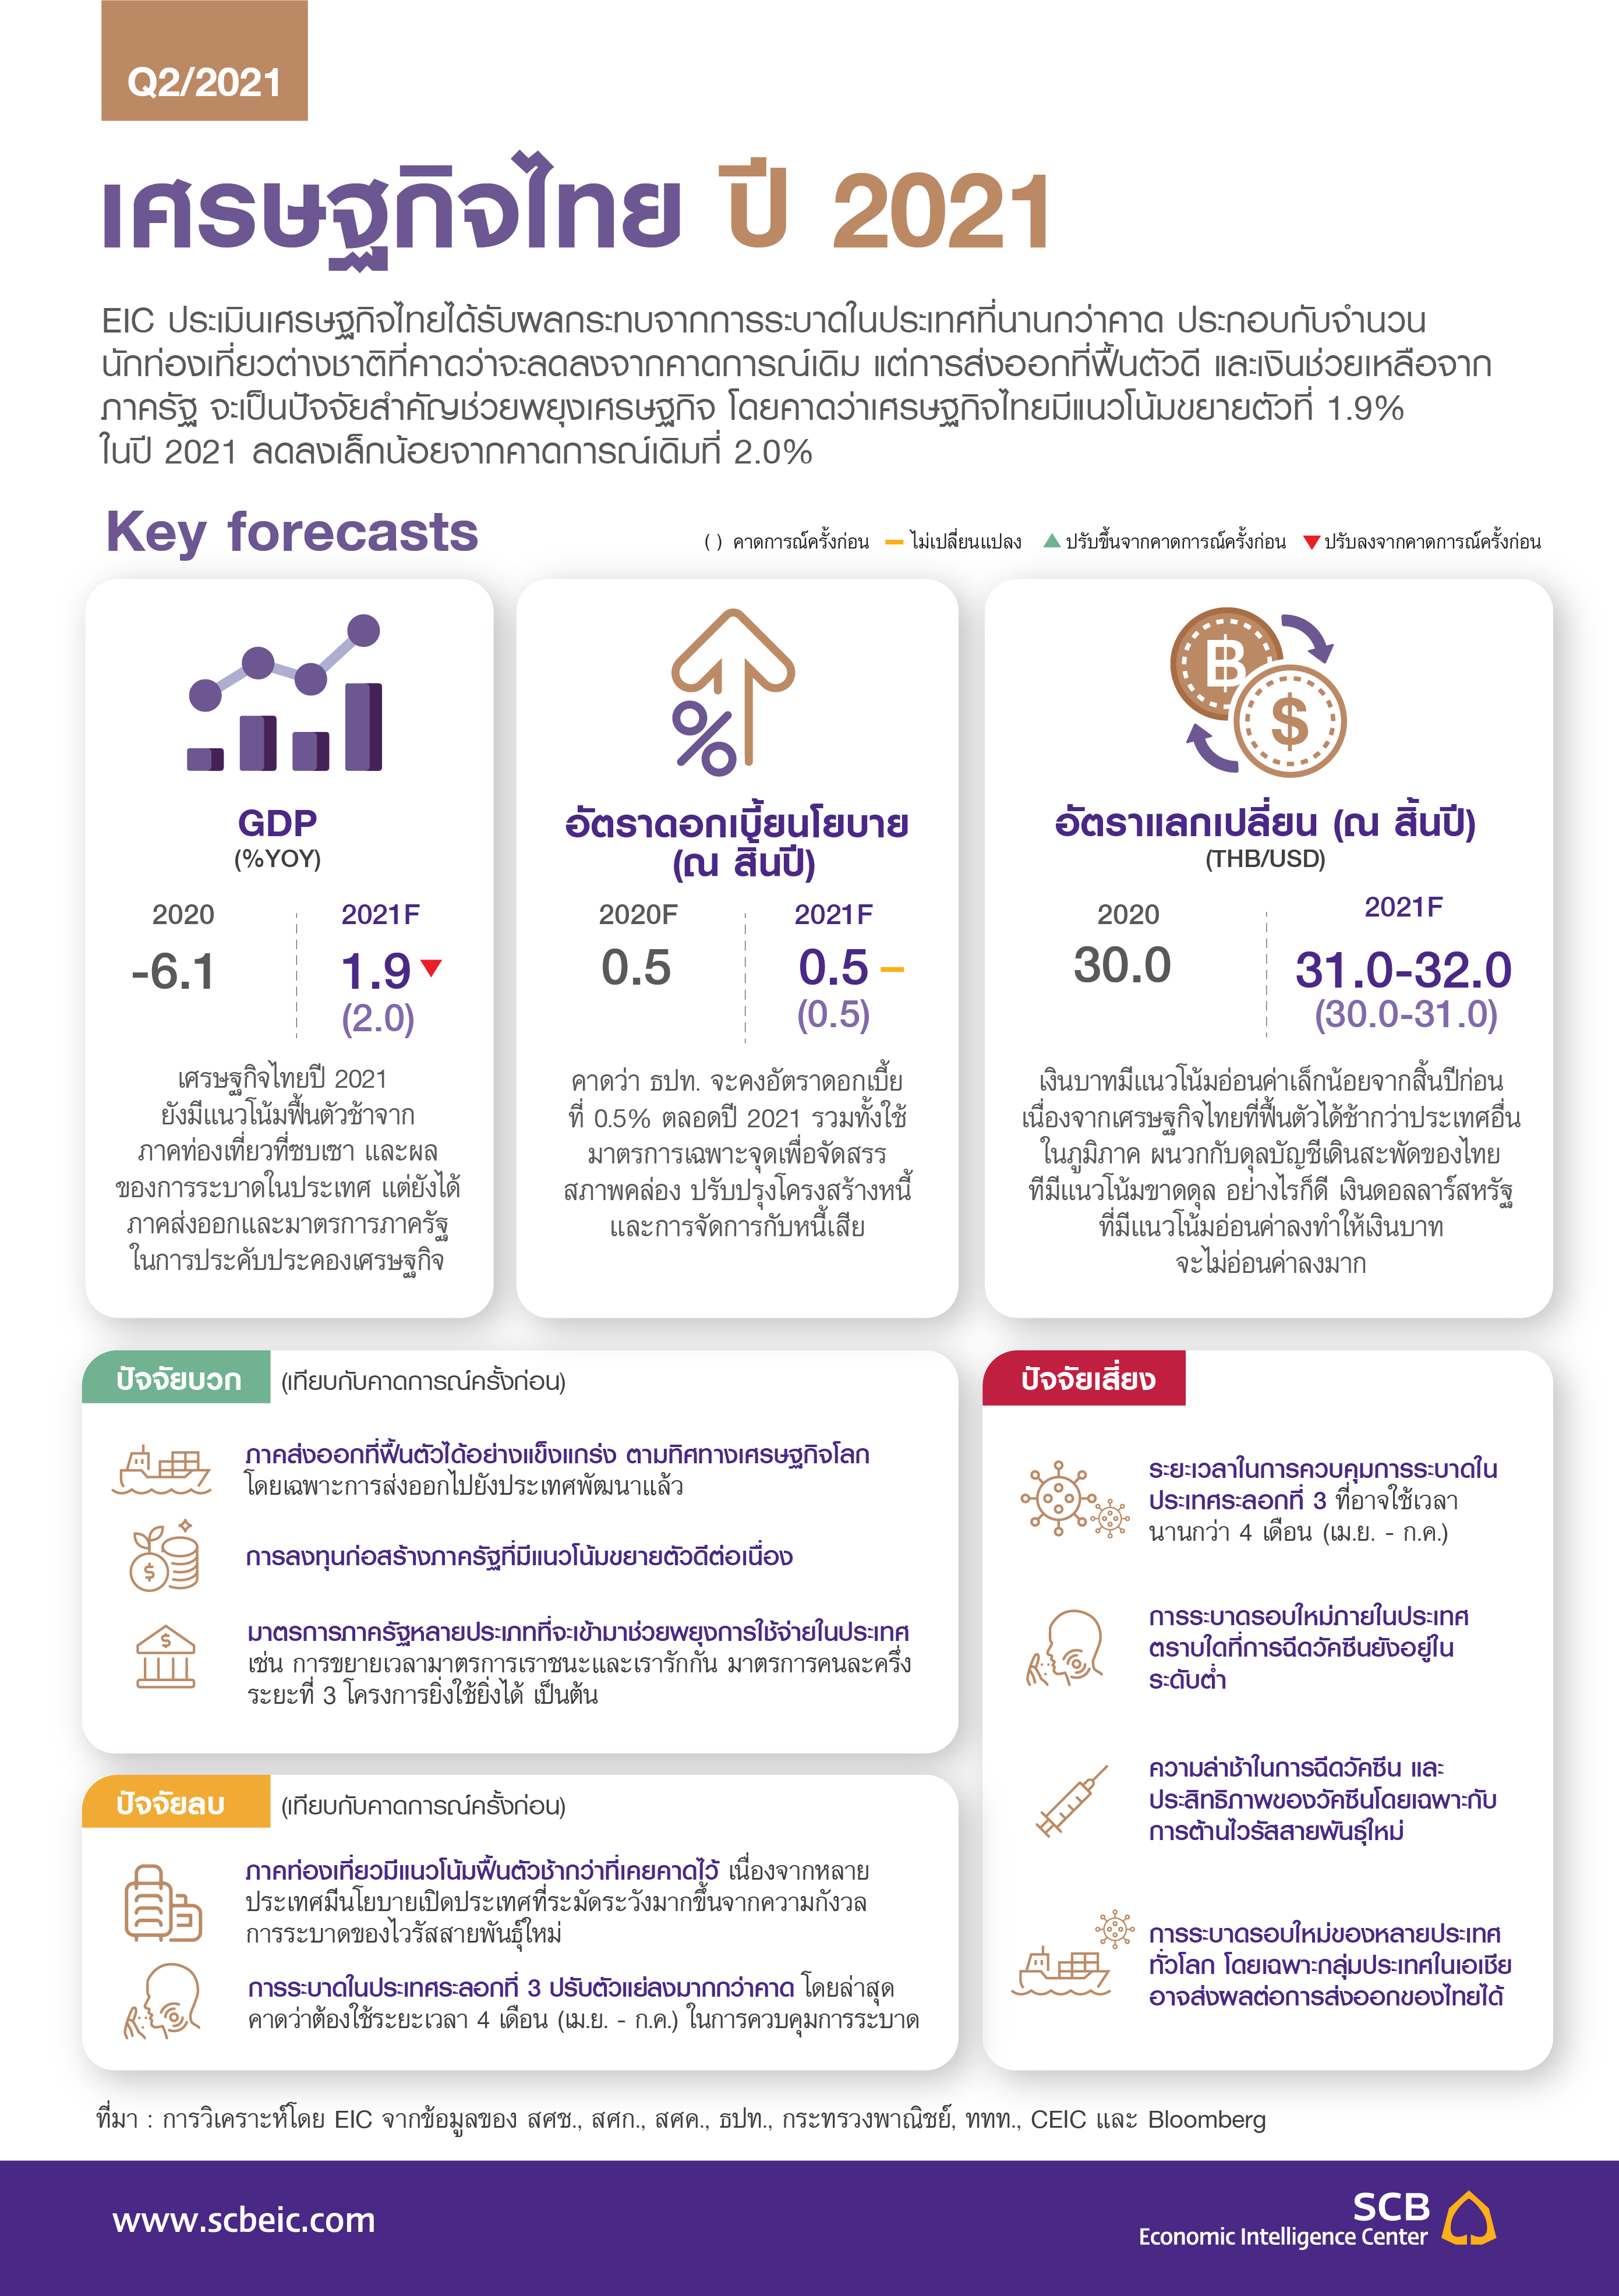 EIC-Outlook-Q22021_InfoThaiEconomy_TH.png